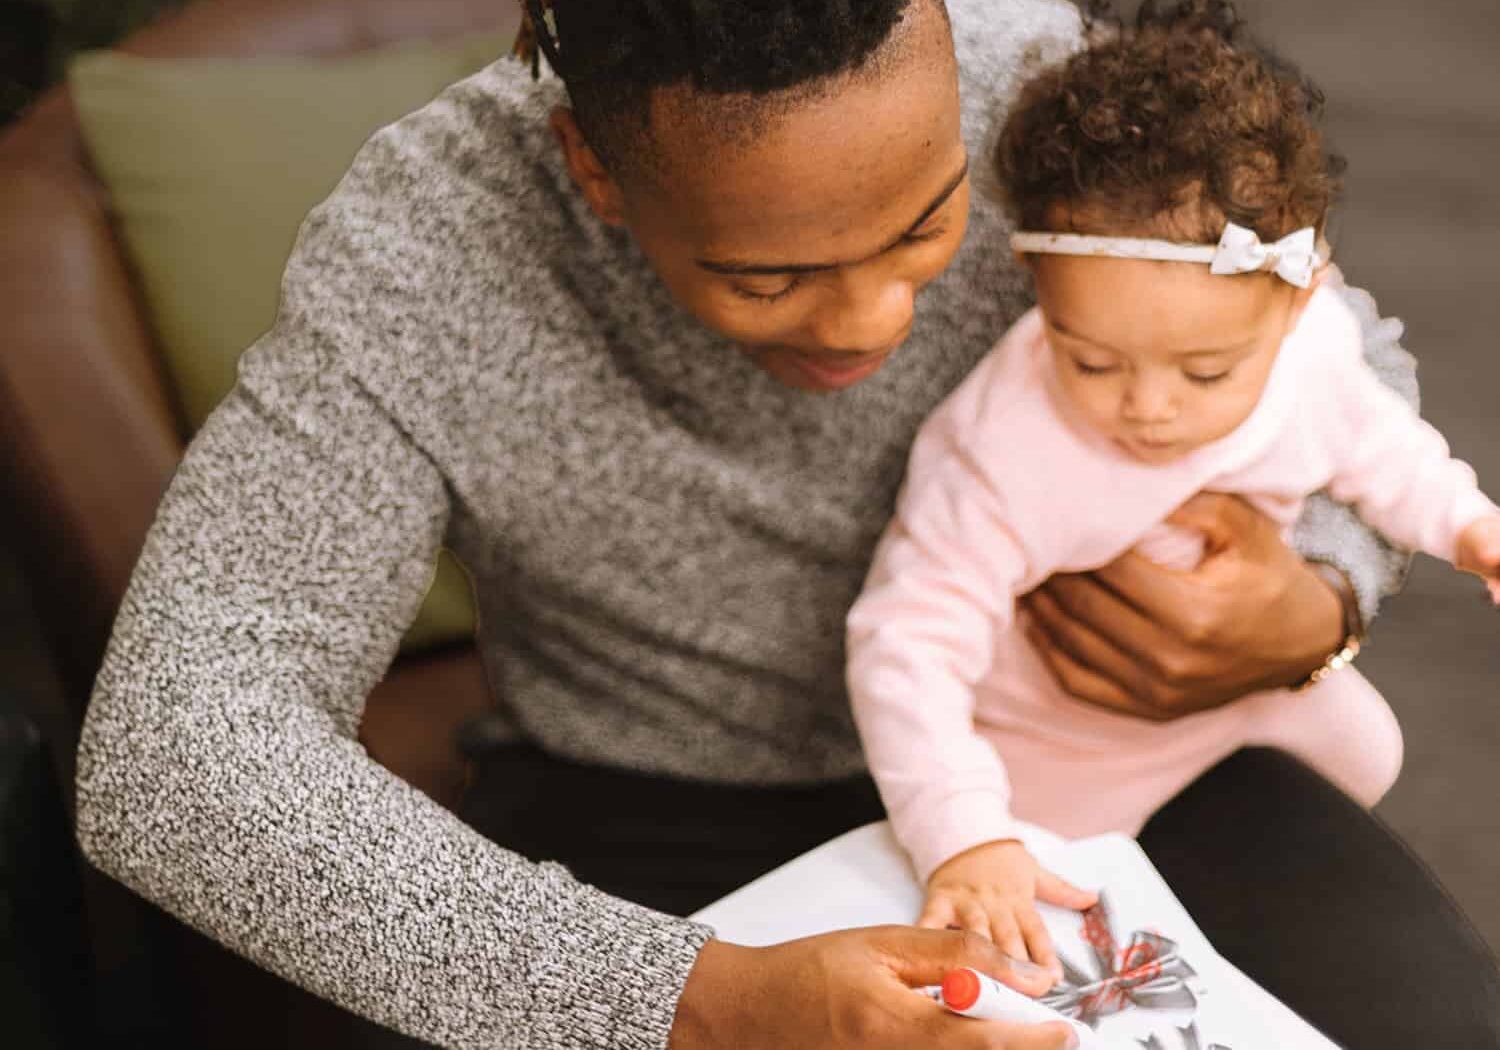 Photo of a daddy coloring with his daughter by Humphrey Muleba on Unsplash